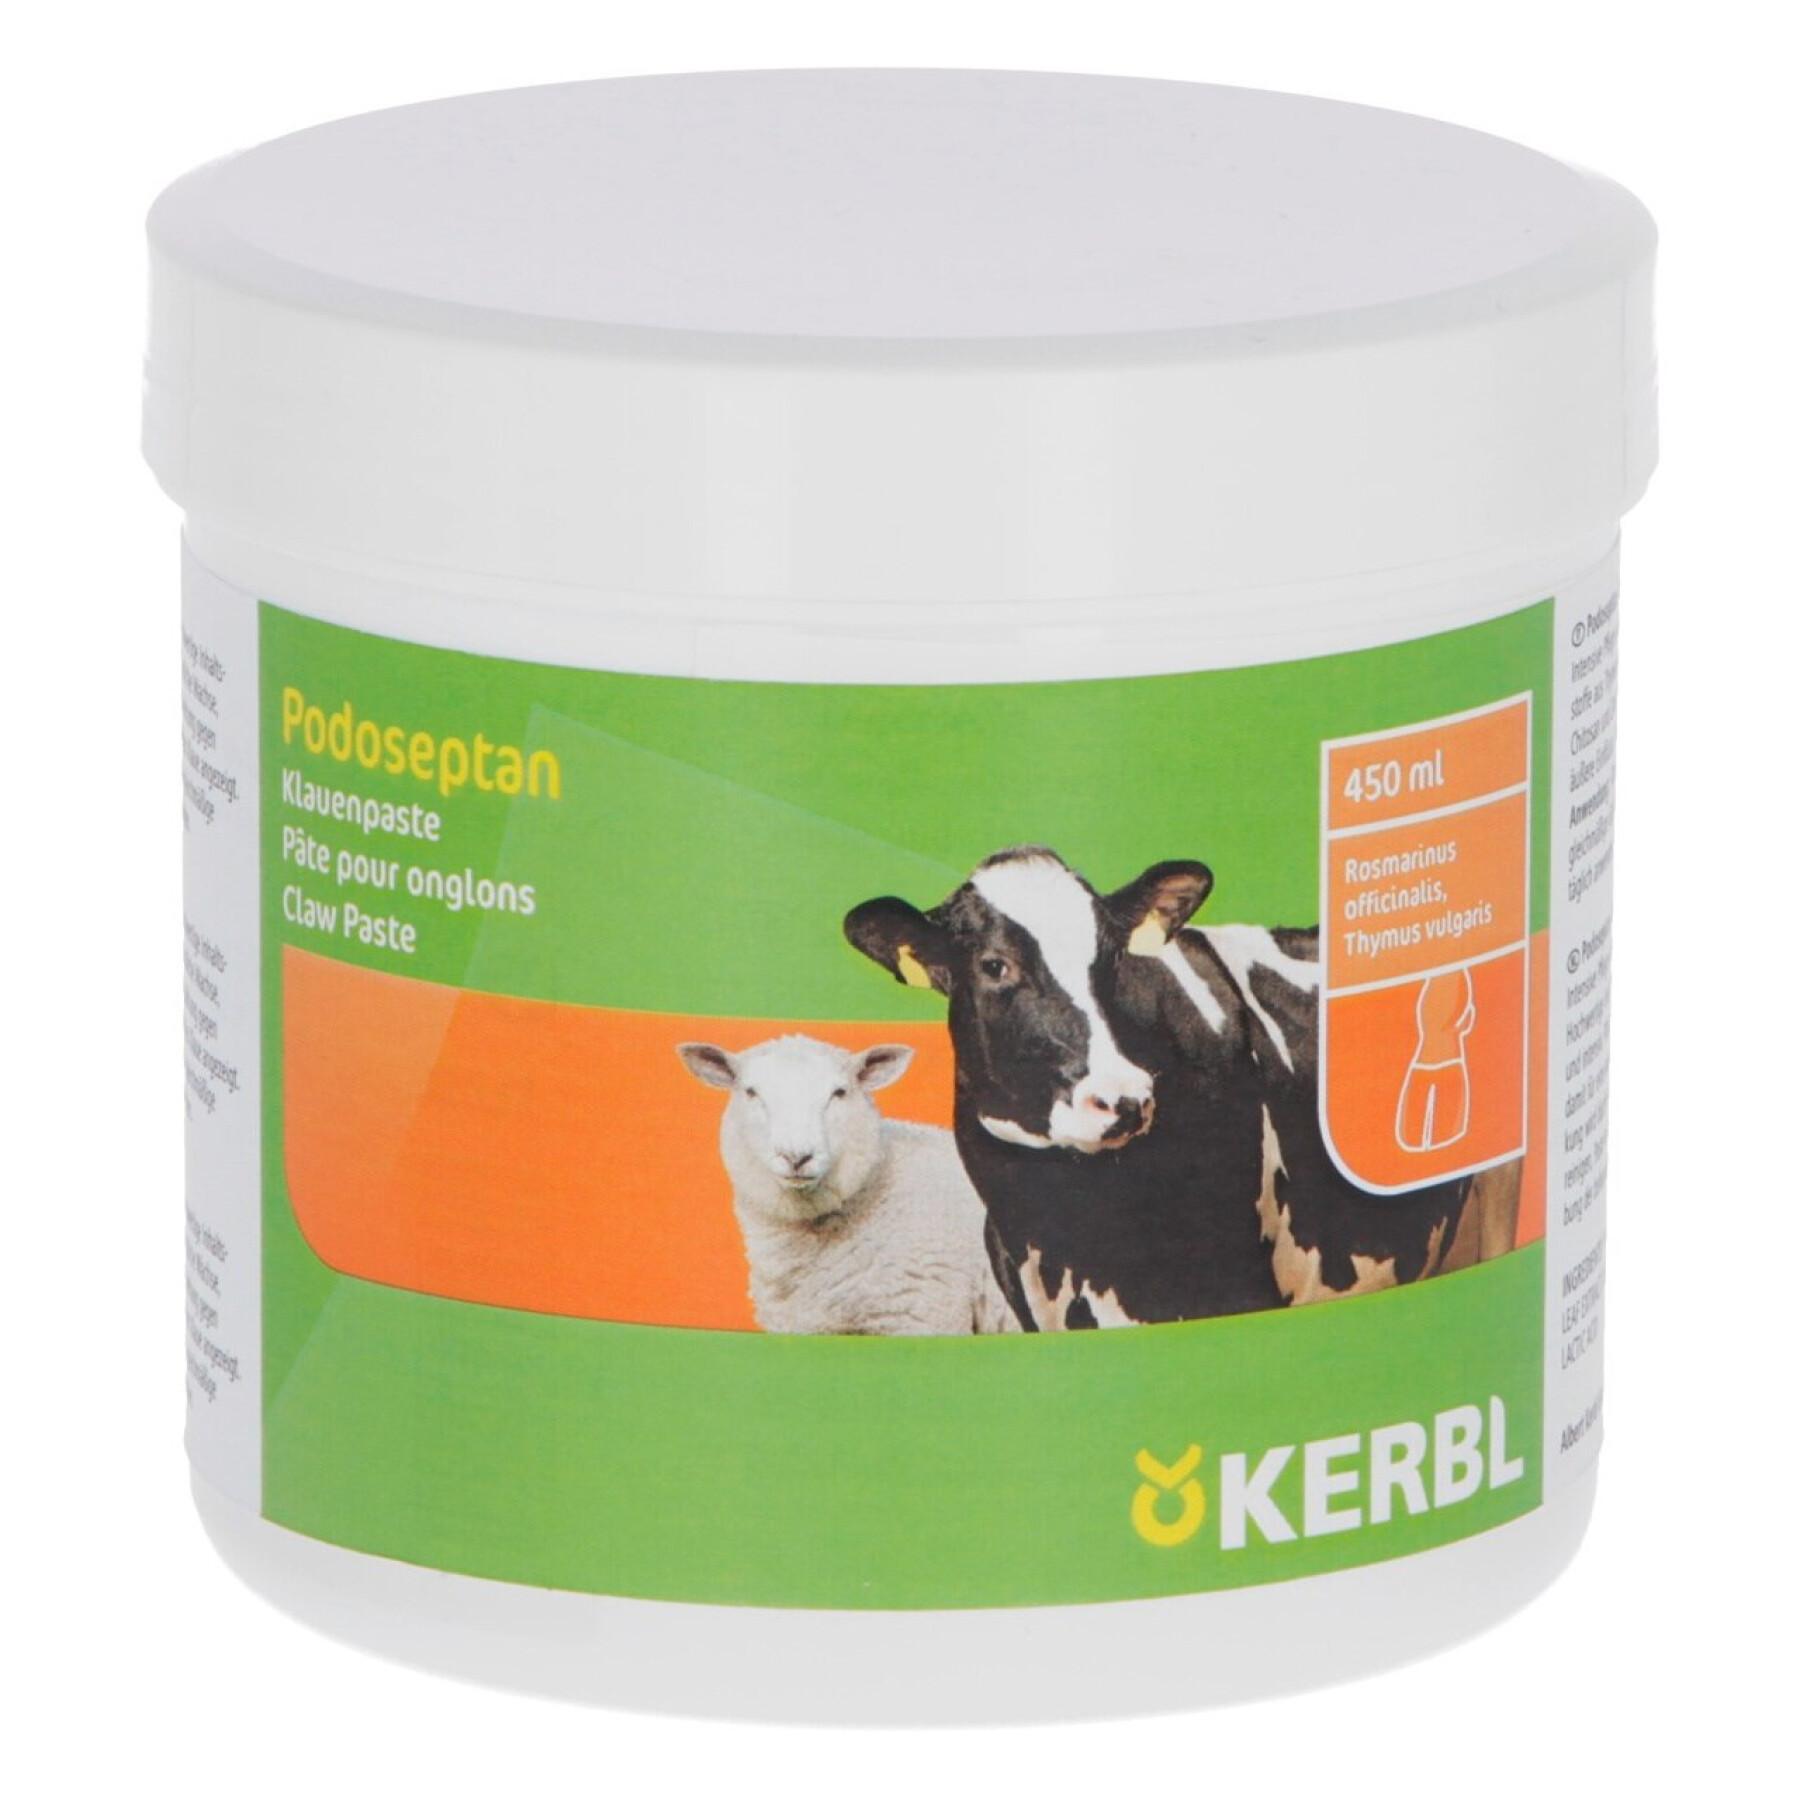 Hoof and claw care paste in a box Kerbl Podoseptan